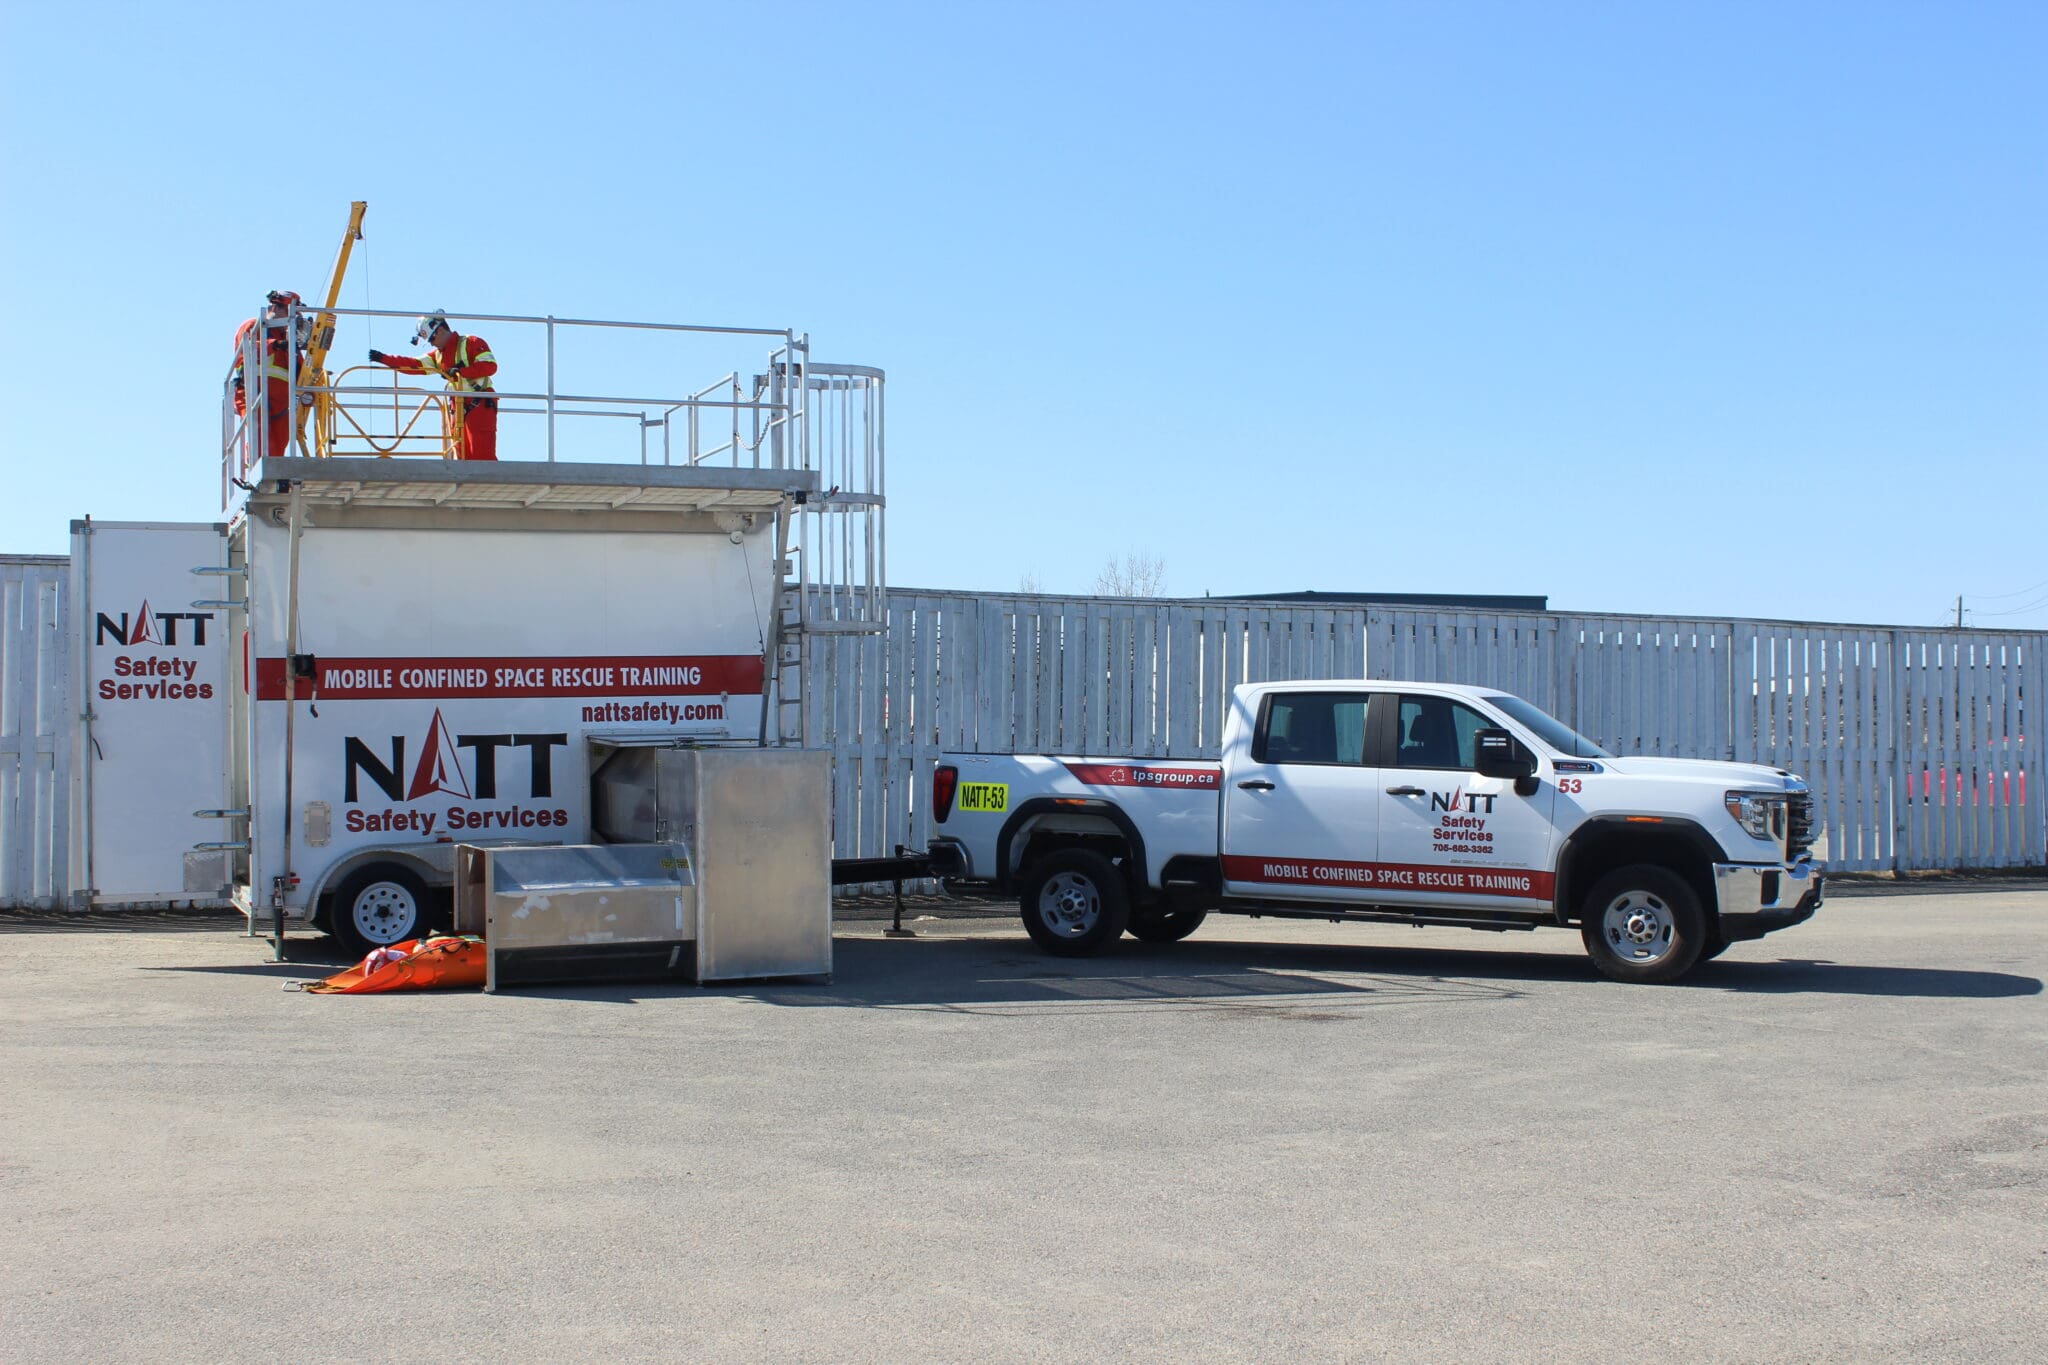 Natt Safety Services Expands Confined Space Rescue Services And